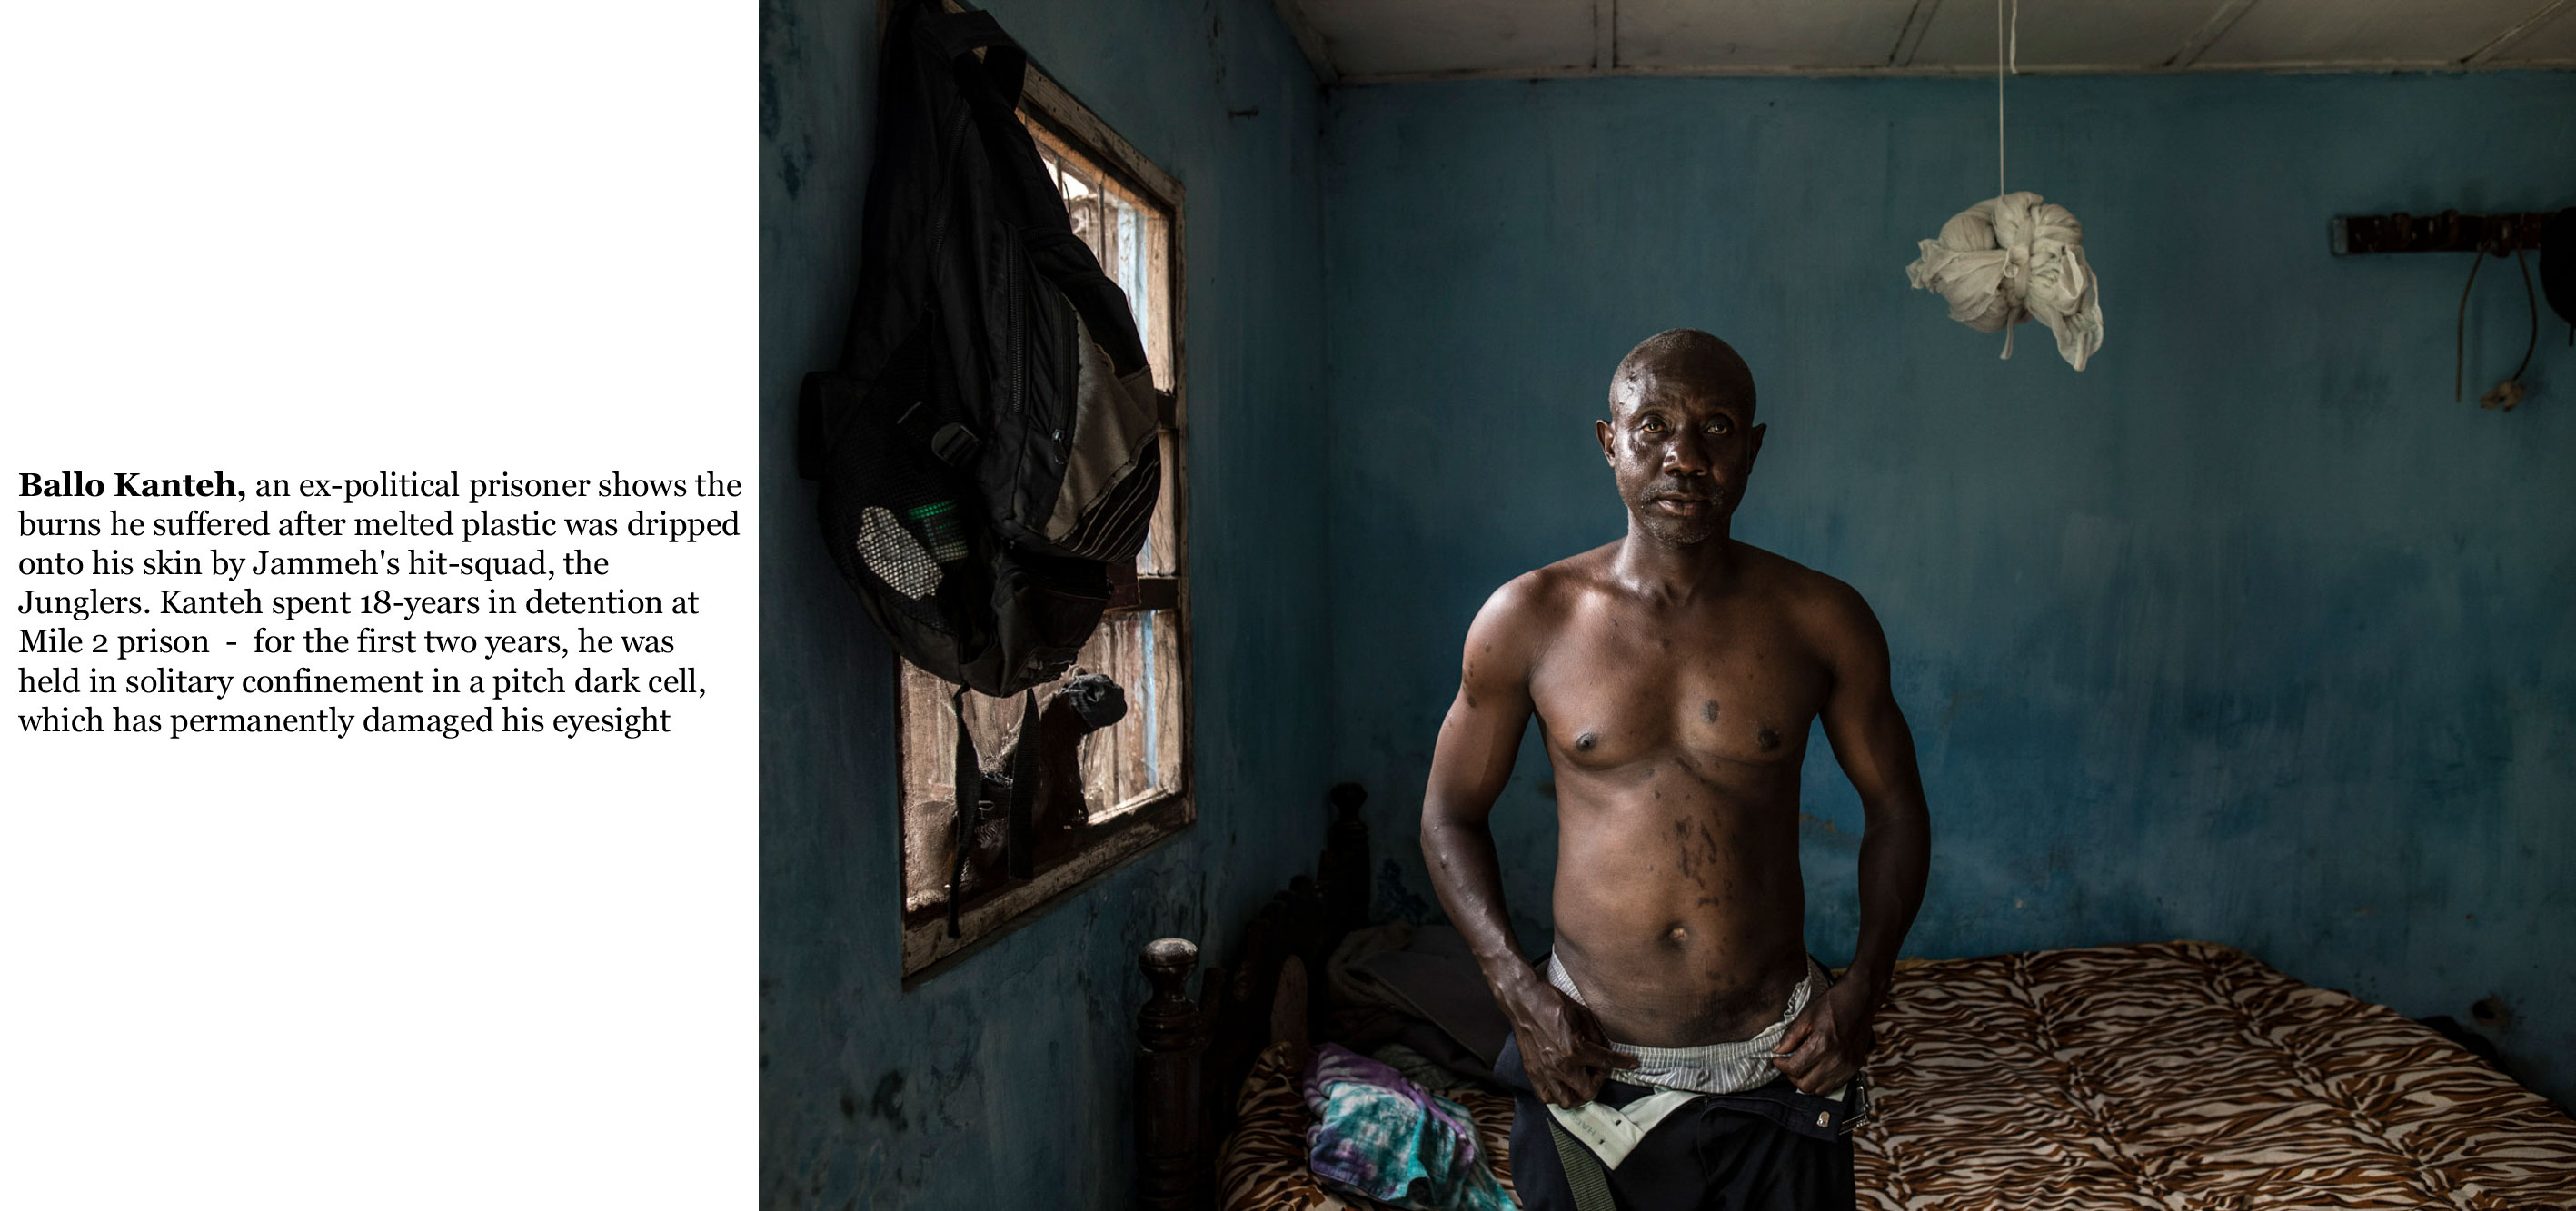 Gambia victims and resisters -Ballo Kanteh held for 18 years in Mile 2 prison and tortured -14_TEXT_web ©Jason florio